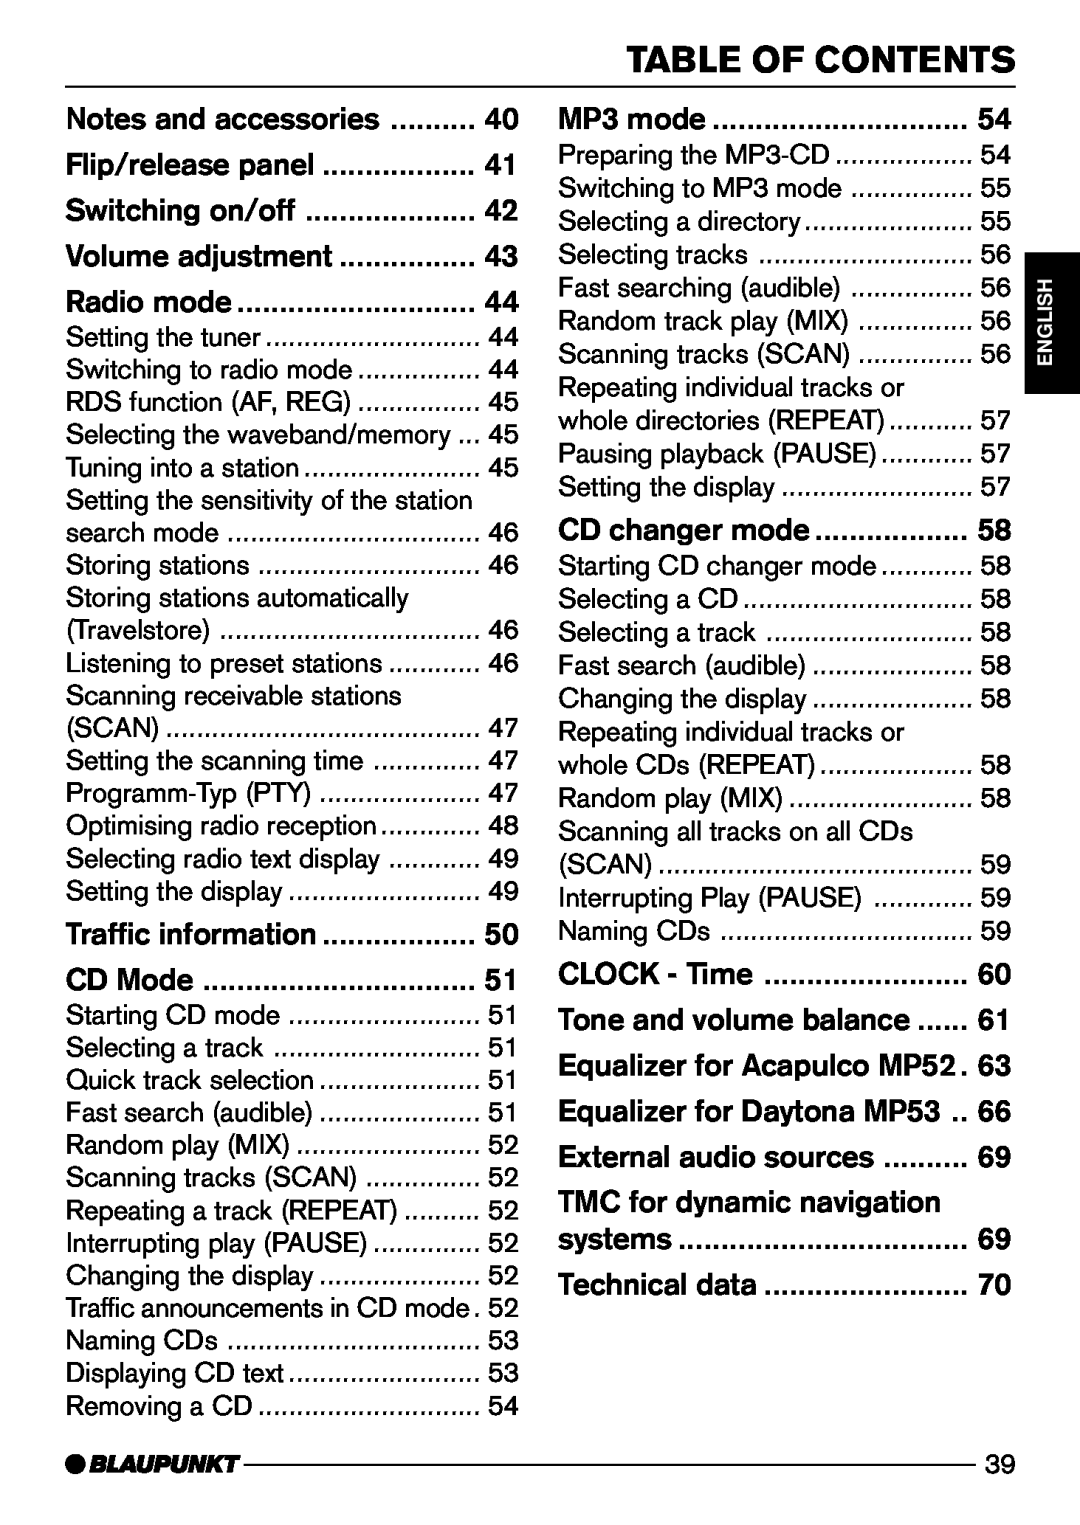 Blaupunkt Daytona MP53, Acapulco MP52 operating instructions Table Of Contents, TMC for dynamic navigation 